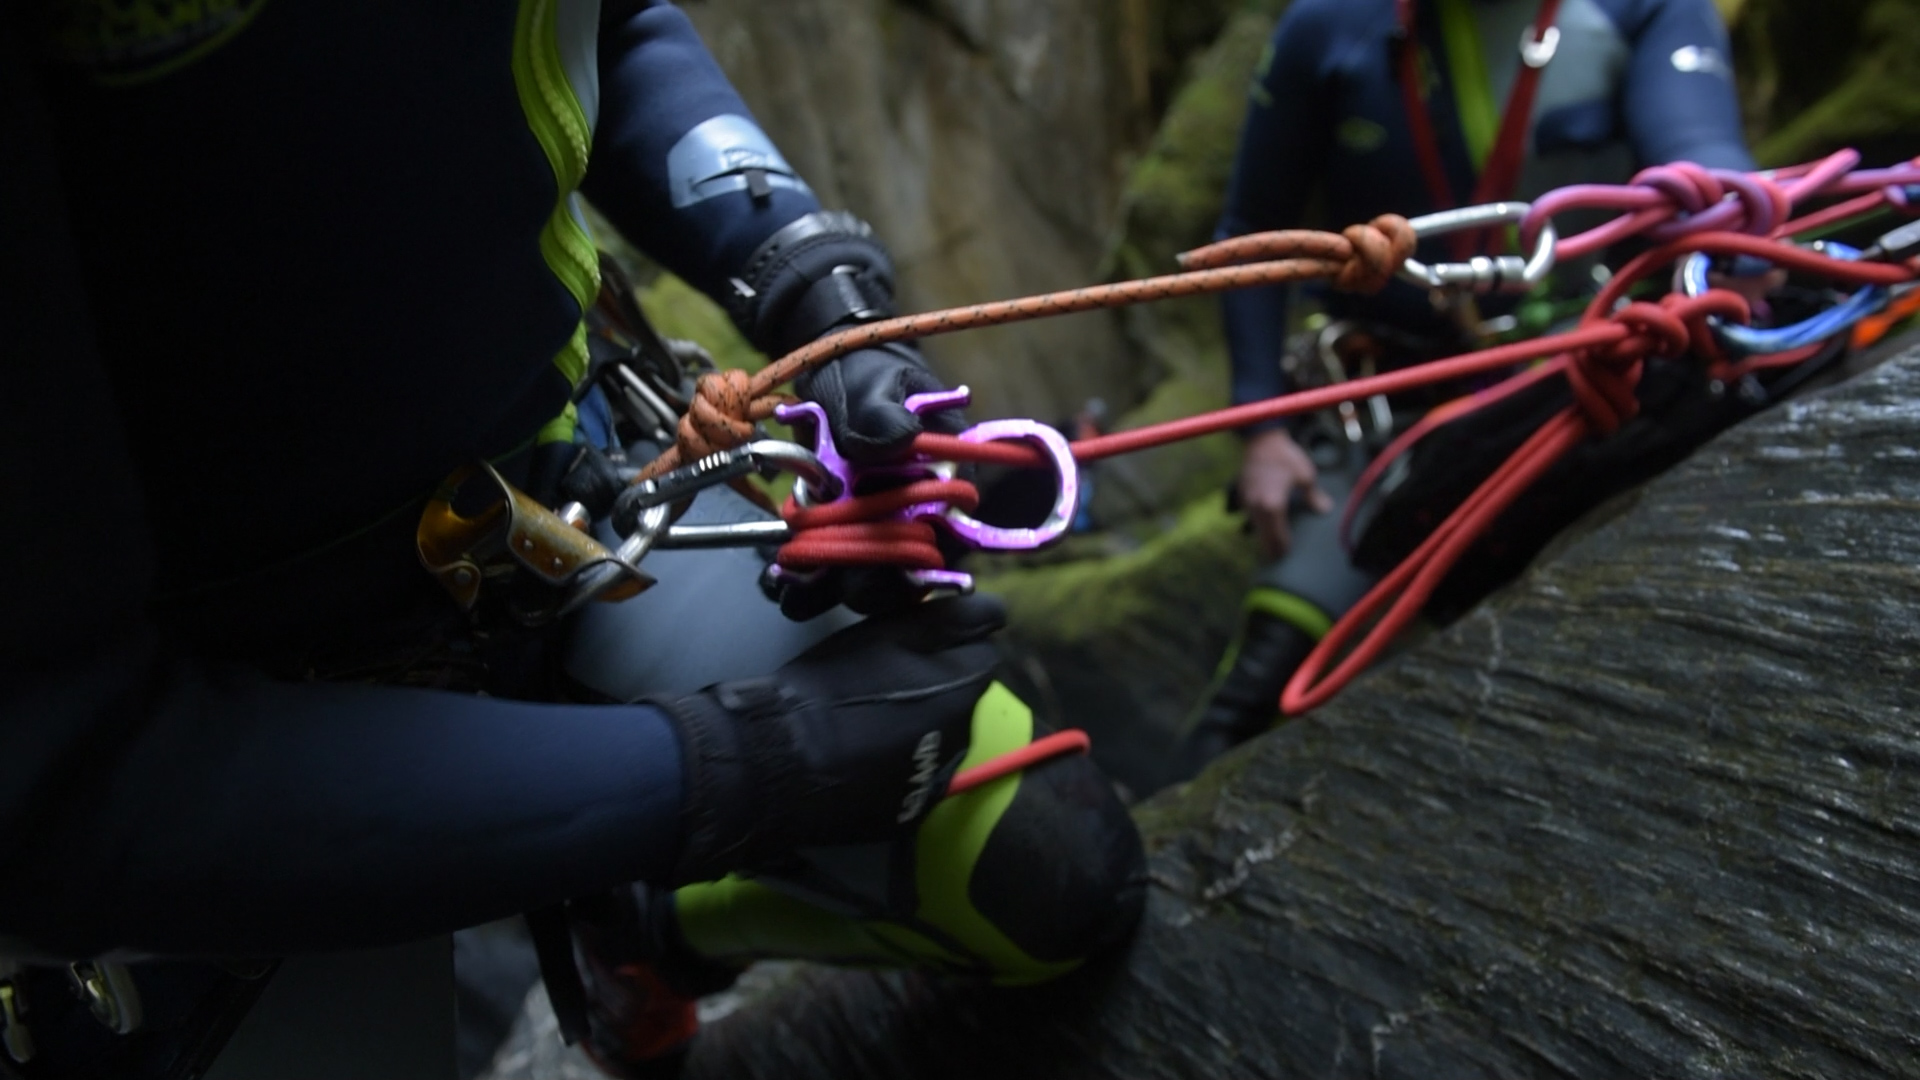 Canyoning descenders friction modes